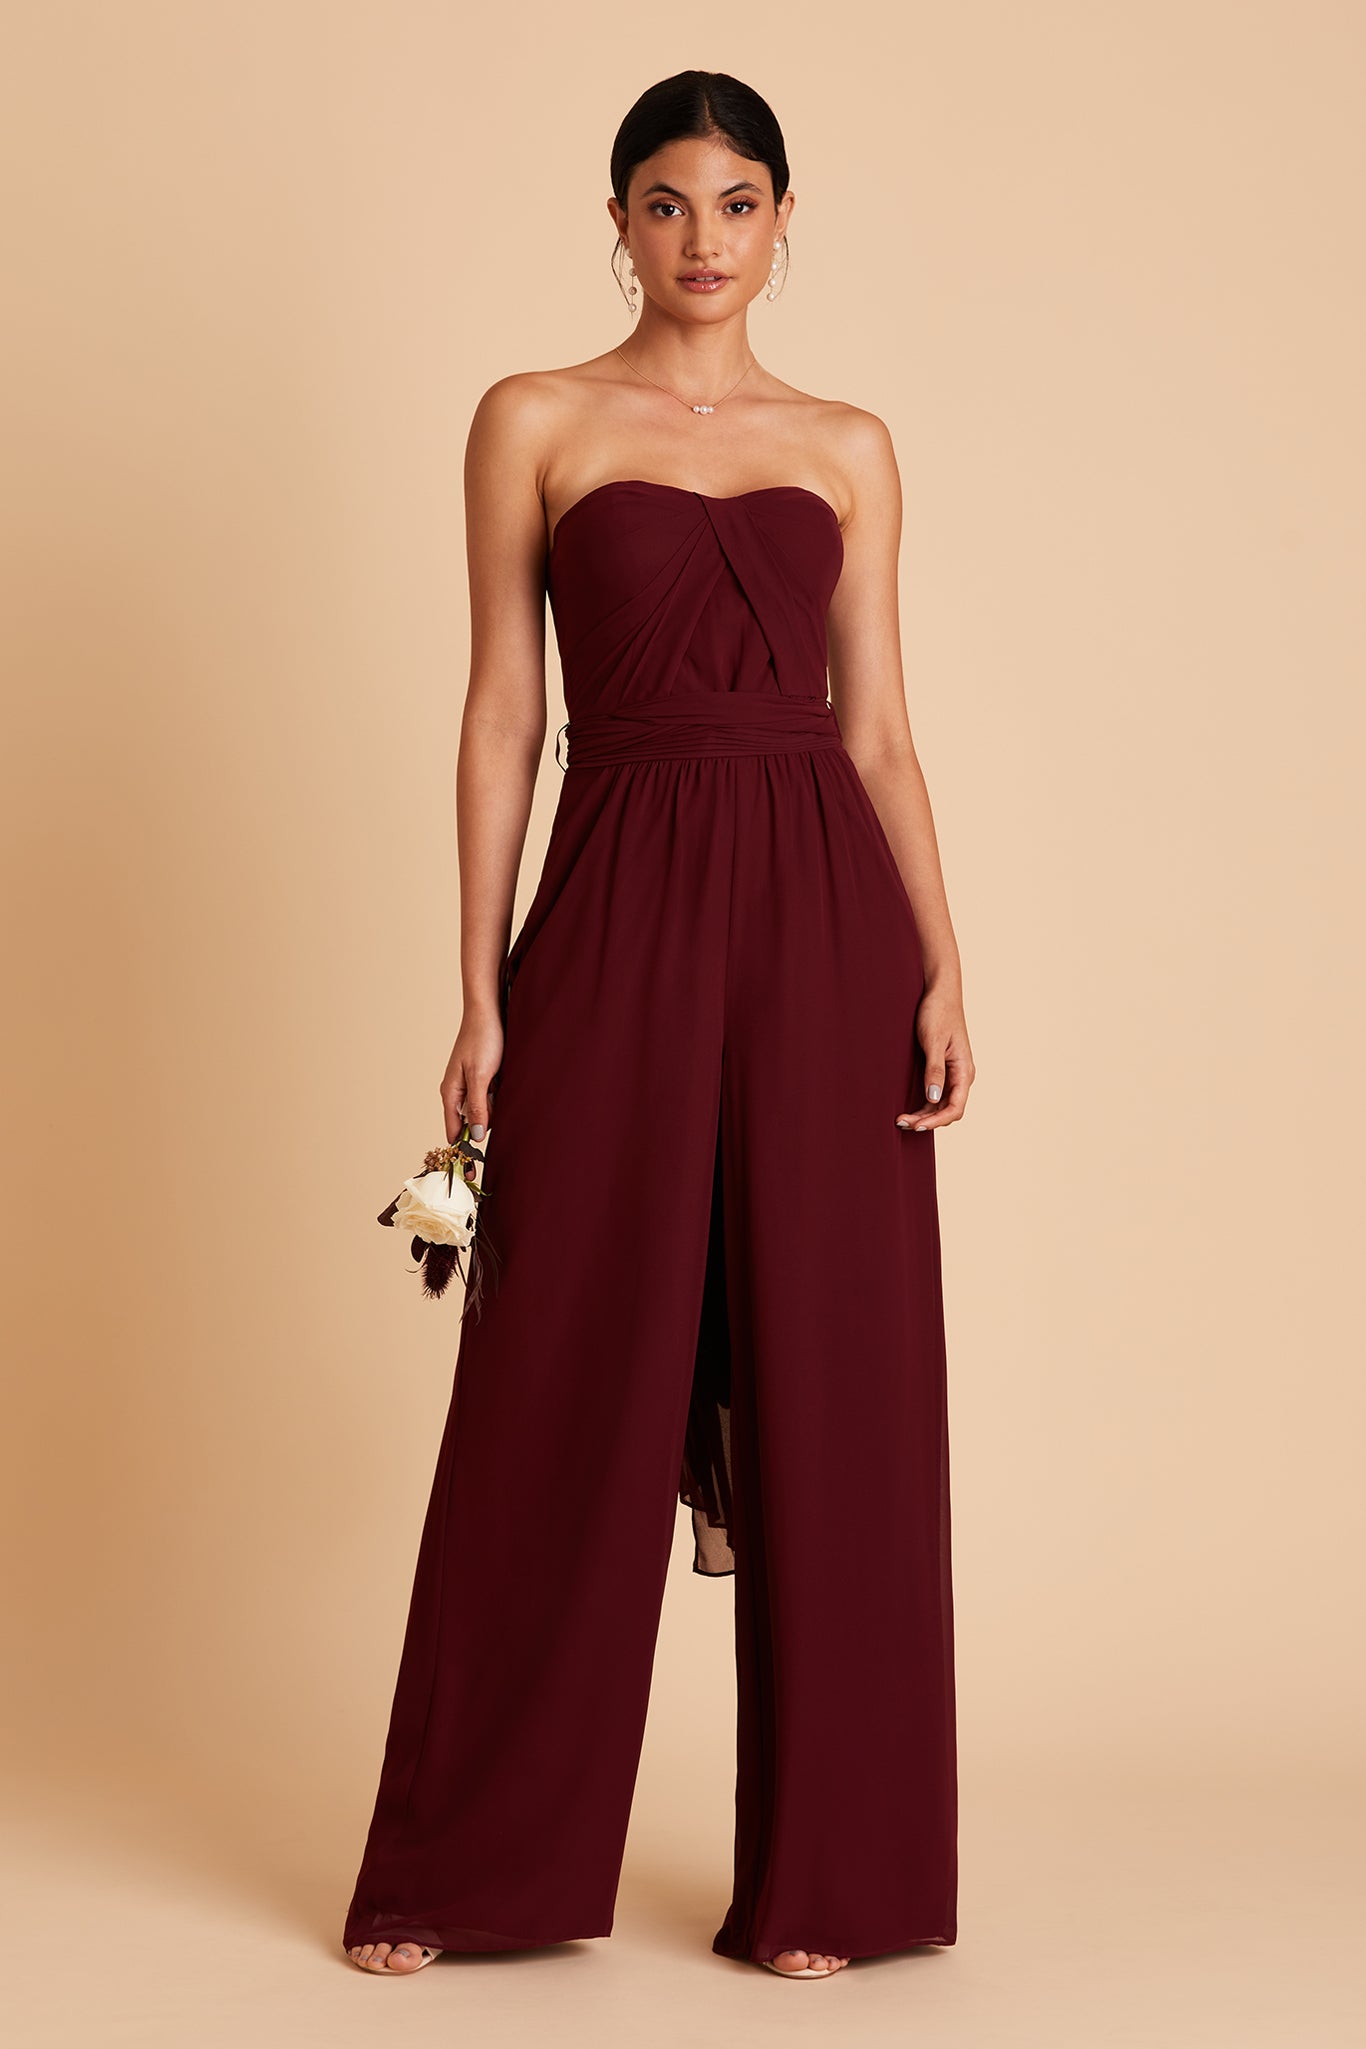 Gigi convertible jumpsuit in cabernet chiffon by Birdy Grey, front view